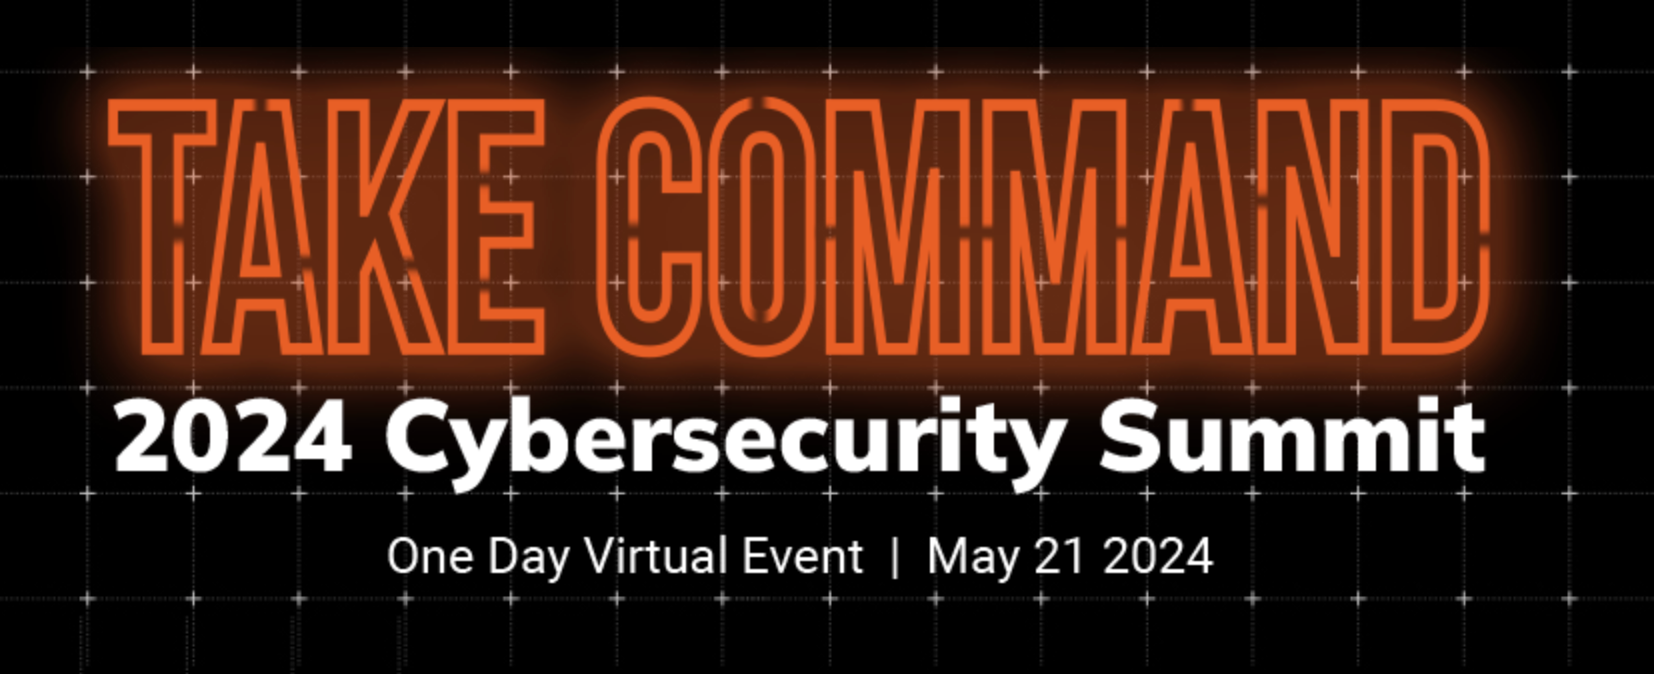 Take Command Summit: A Message from Rapid7 Chairman and CEO, Corey Thomas